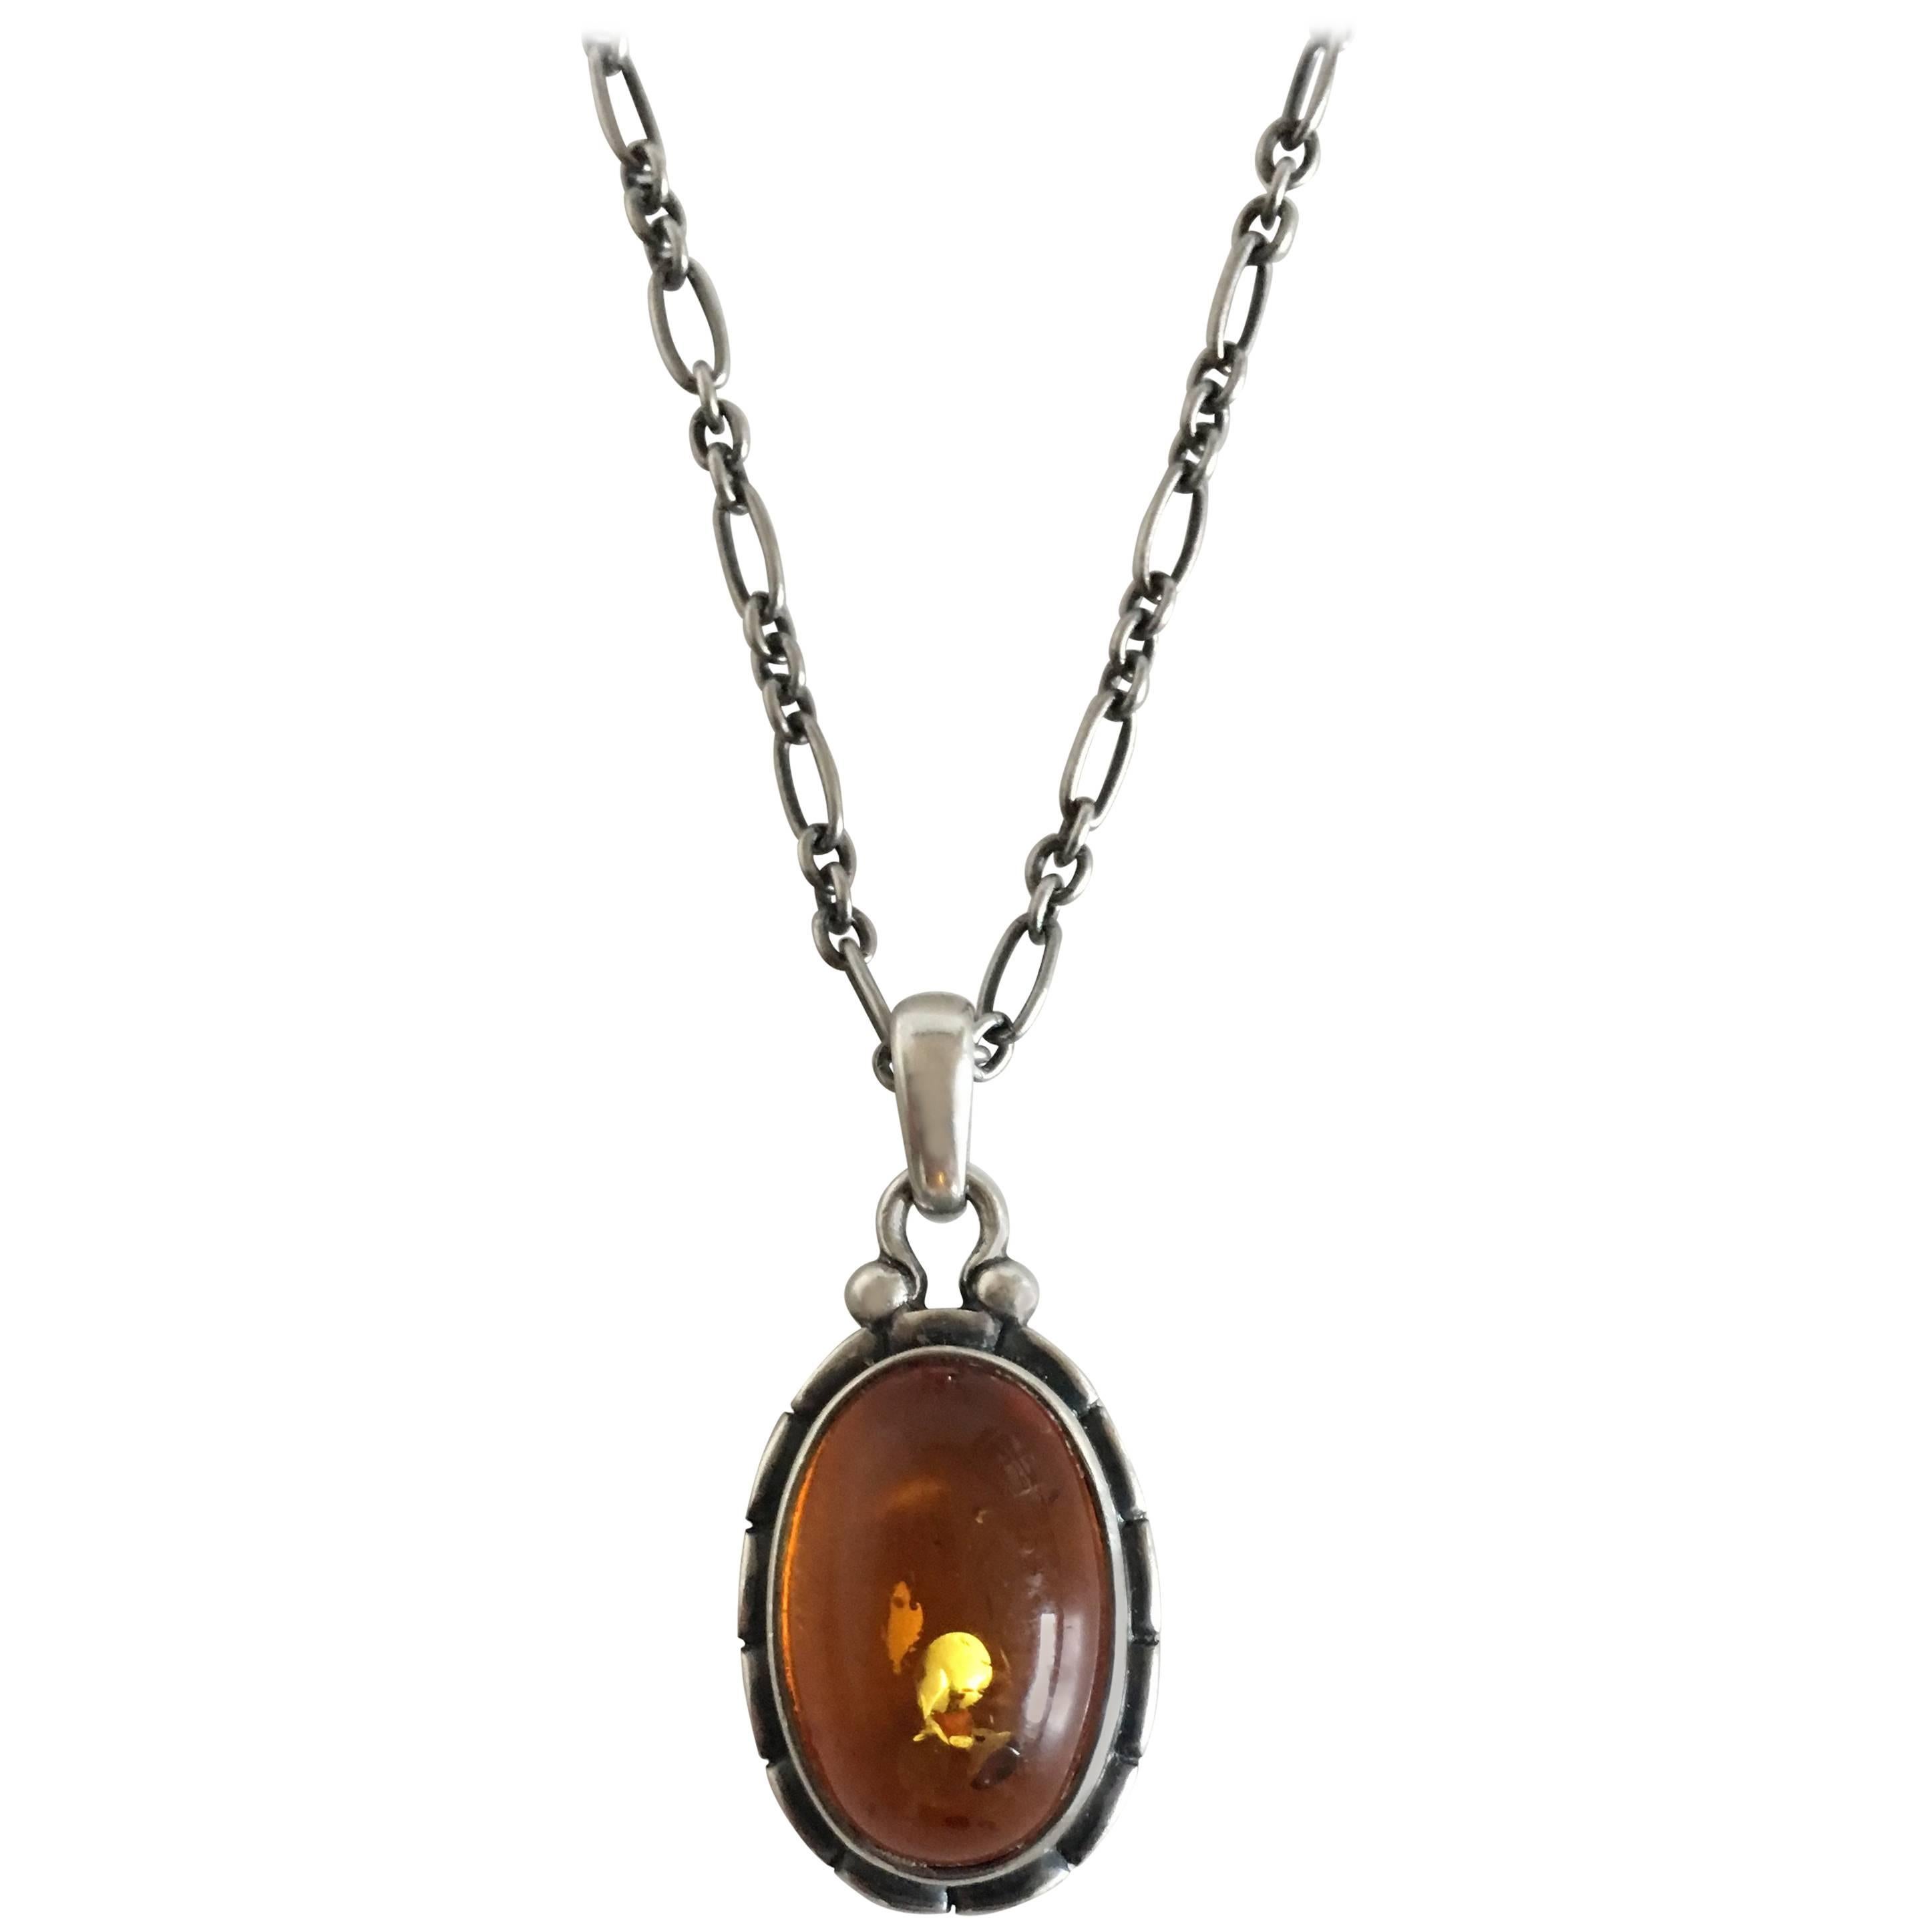 Georg Jensen Annual Pendent in Sterling Silver with Amber Stone, 2001